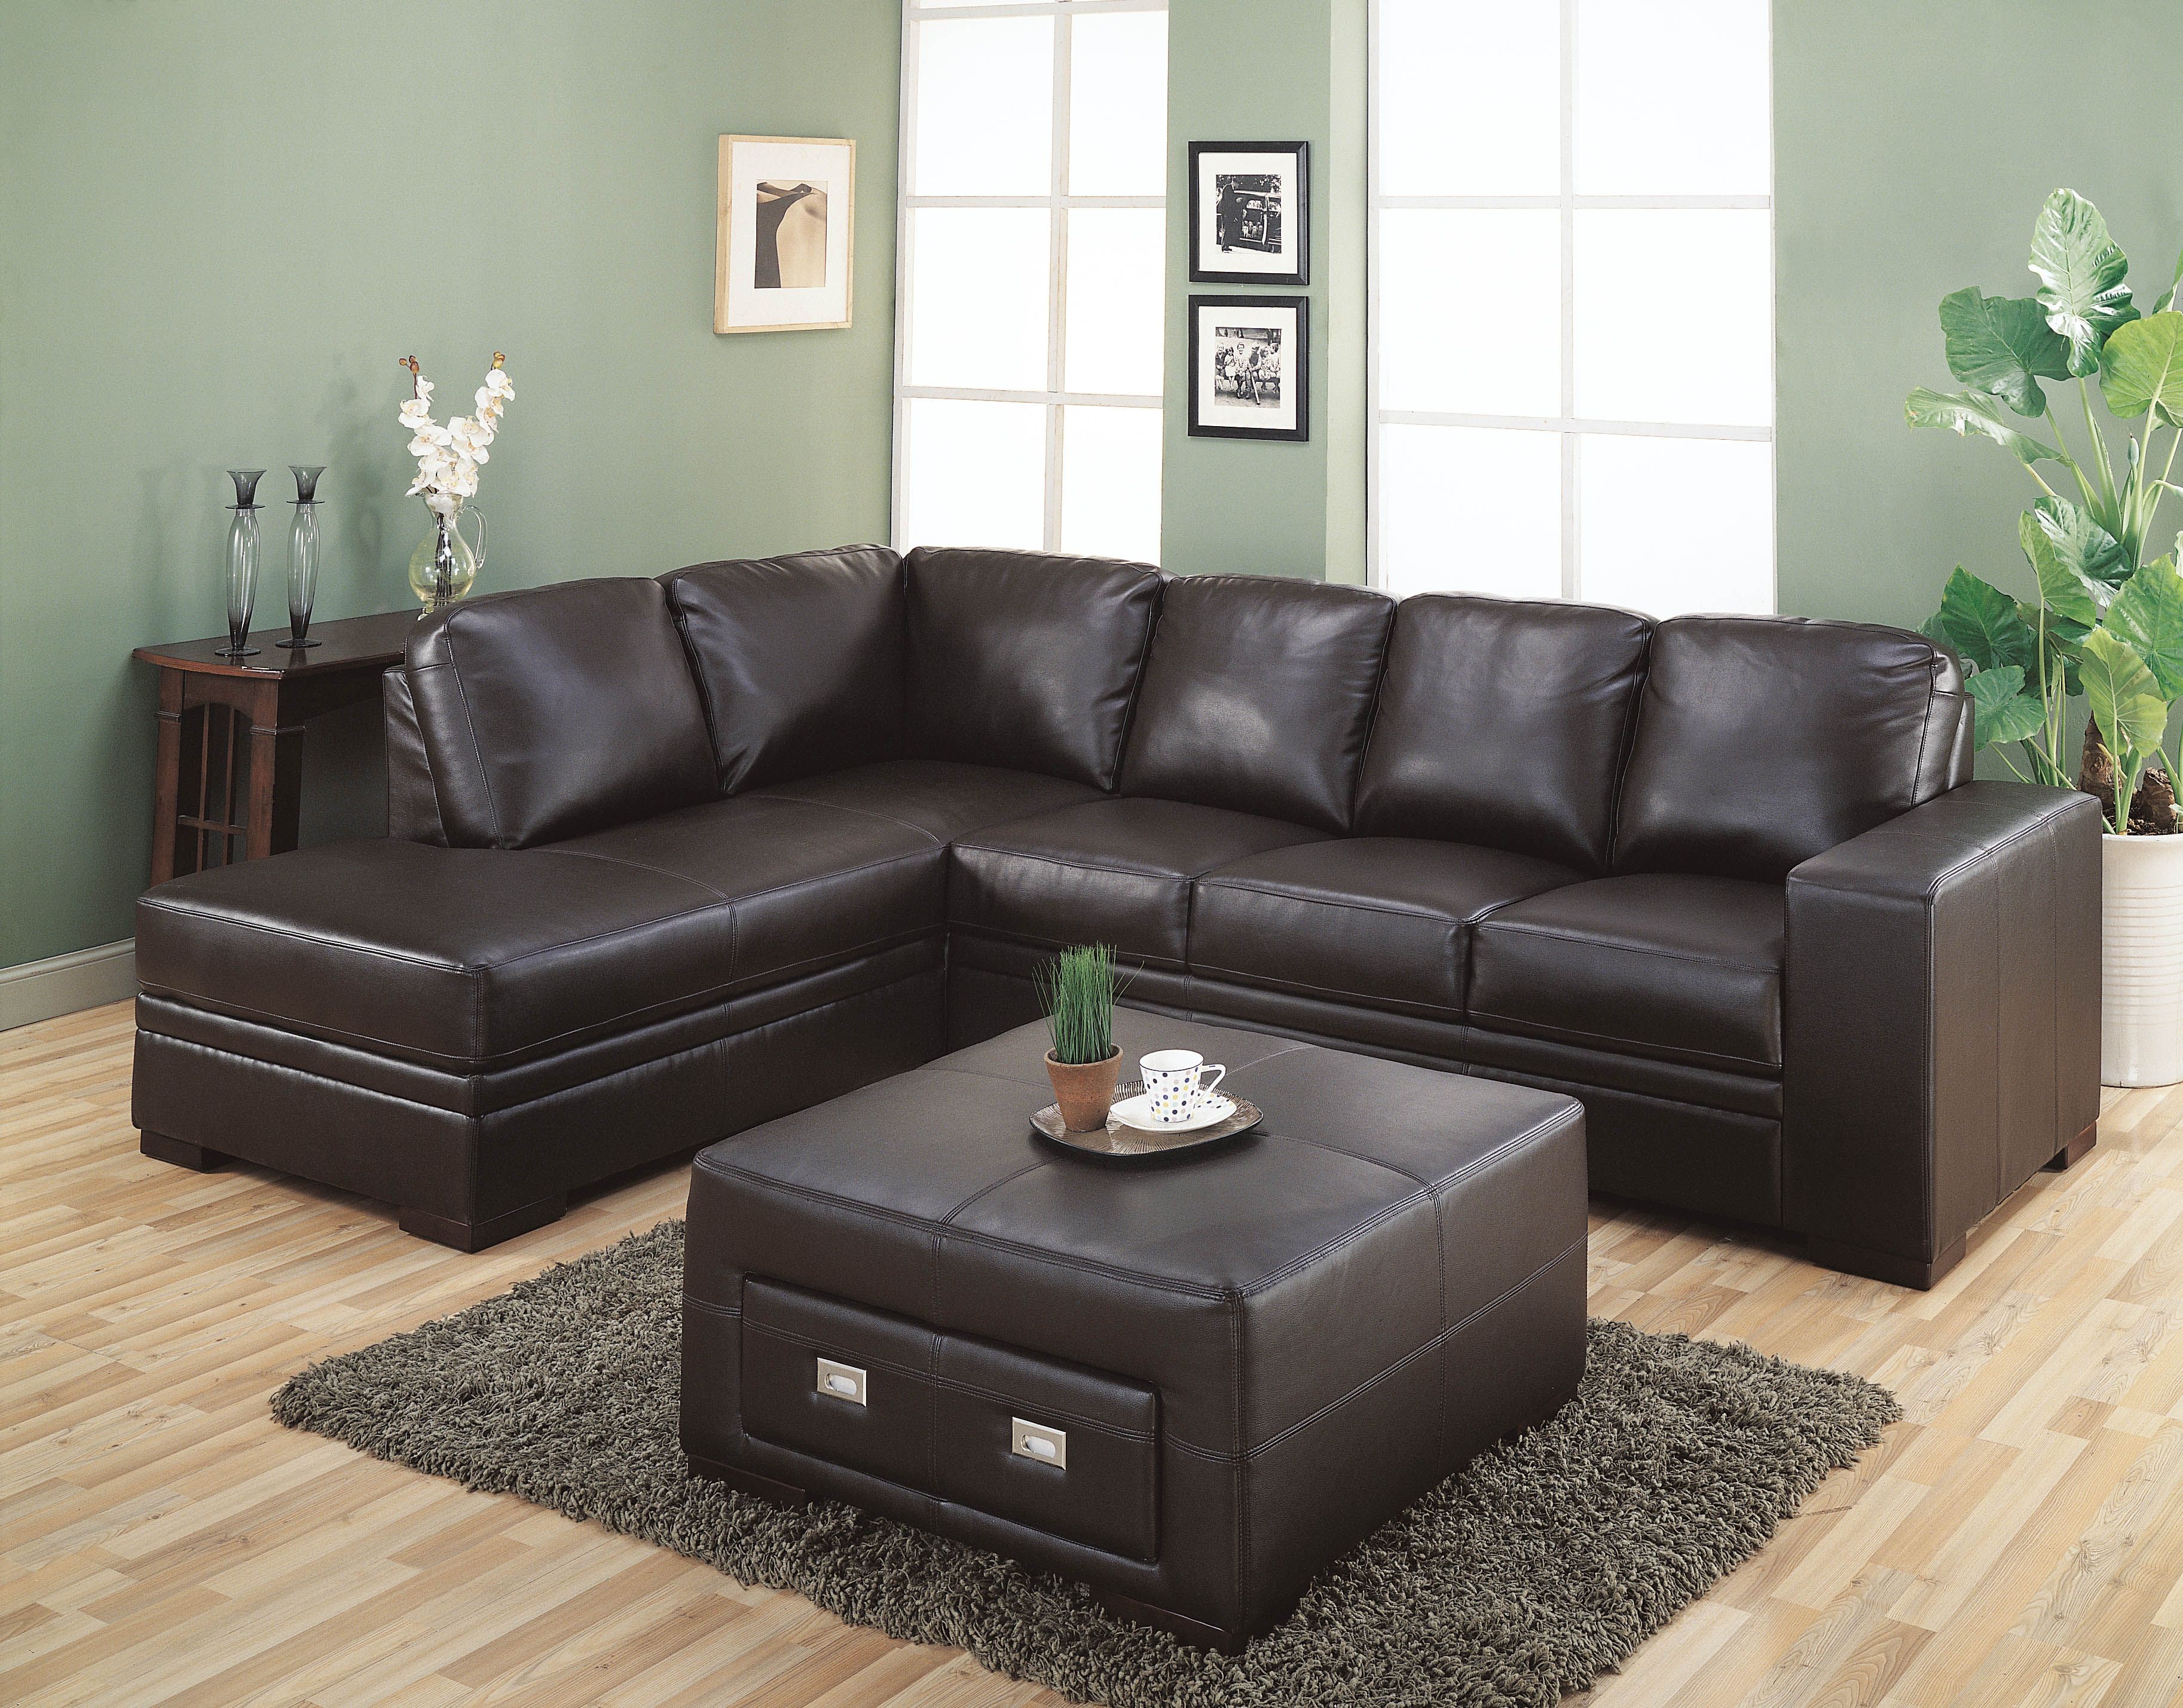 18 Chocolate Brown Sectional Sofa Carehouse For Chocolate Brown Sectional Sofa (View 9 of 15)